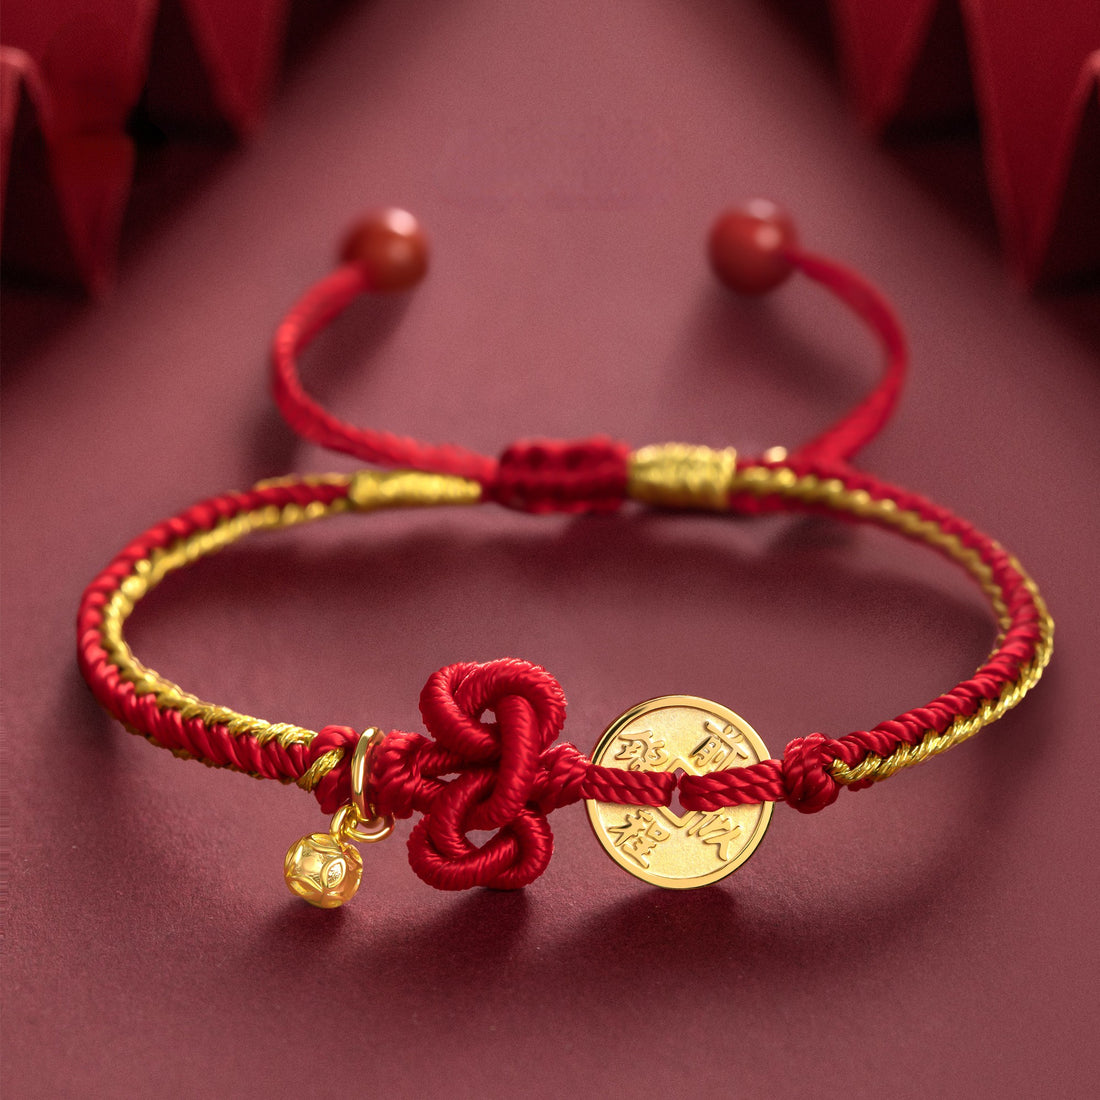 &quot;Bright Future 前程似锦&quot; Top Scholar Woven Red String Bracelet - CHINASQUAD